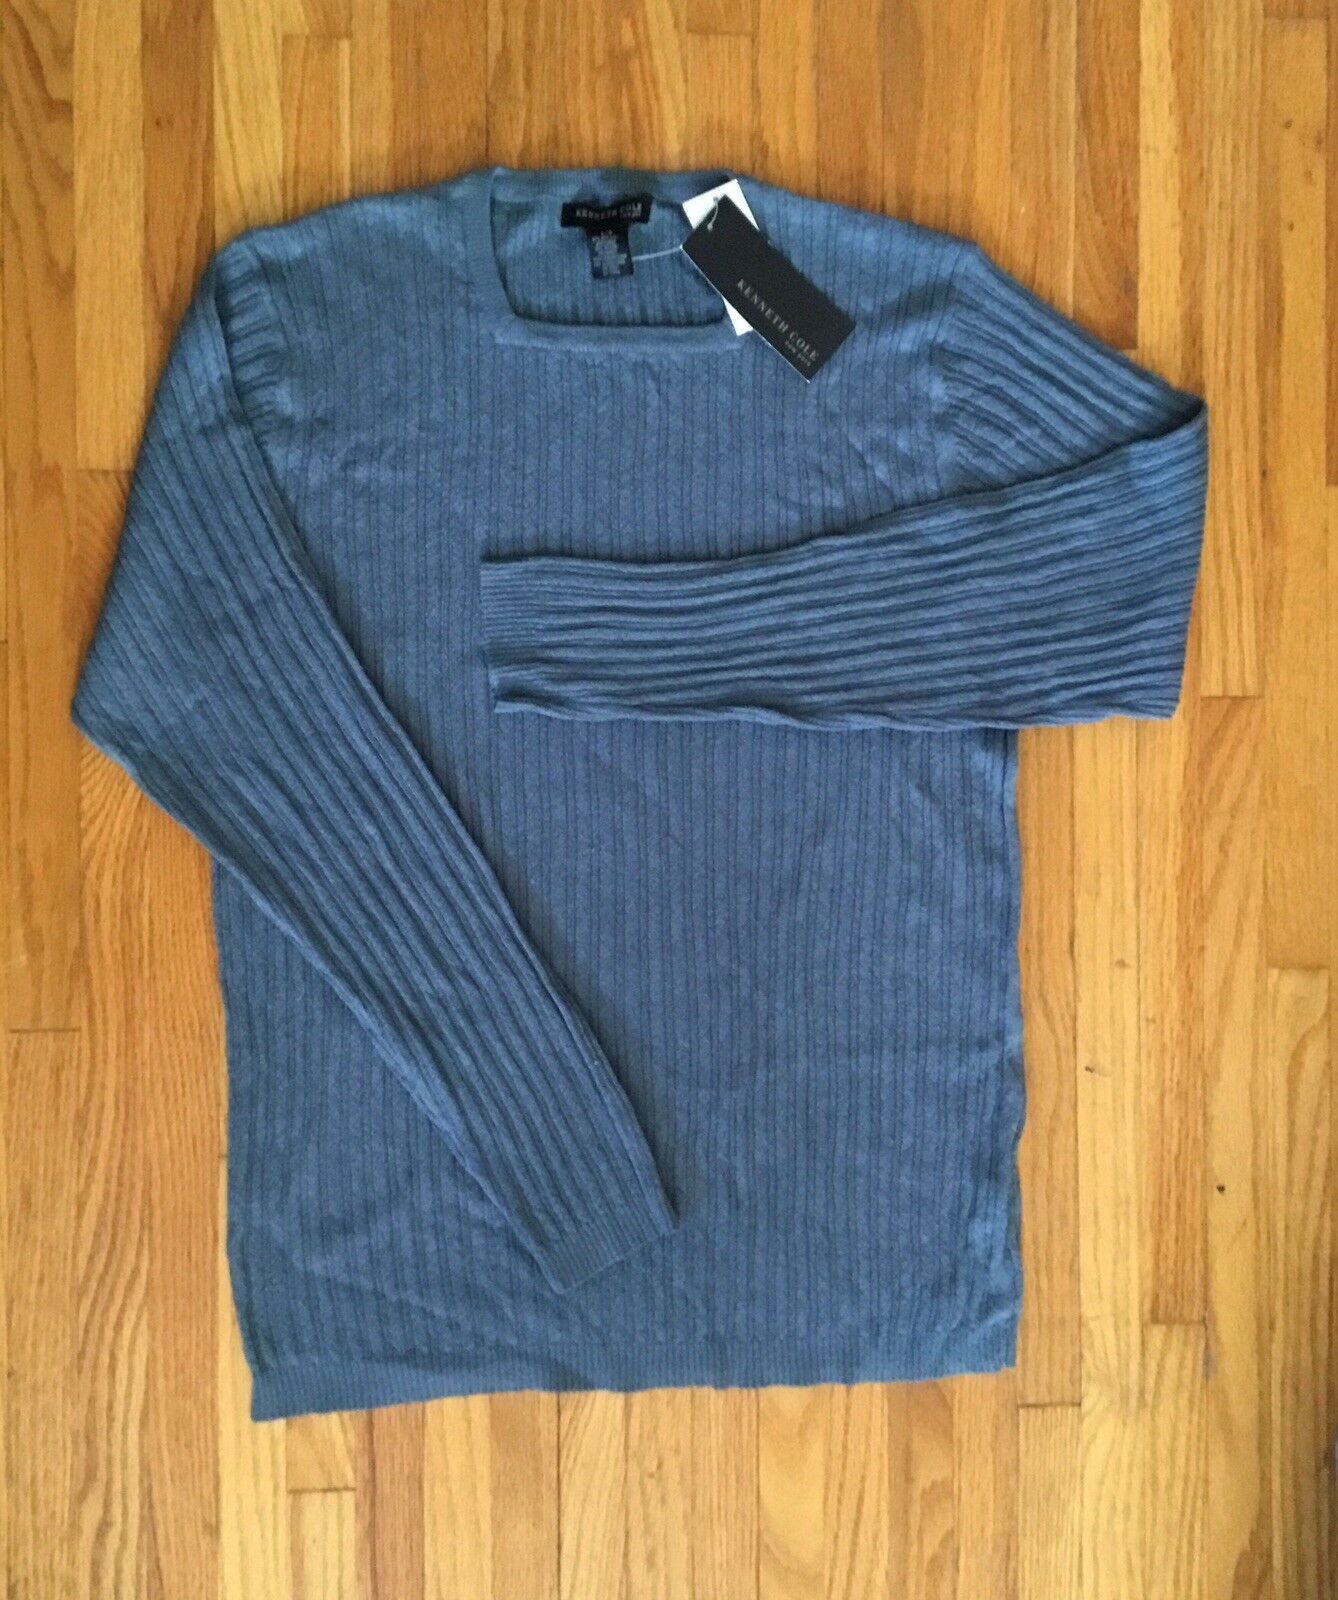 Primary image for Brand New NWT KENNETH COLE NEW YORK Mens Dusk Blue Acrylic Blend Sweater Sz L